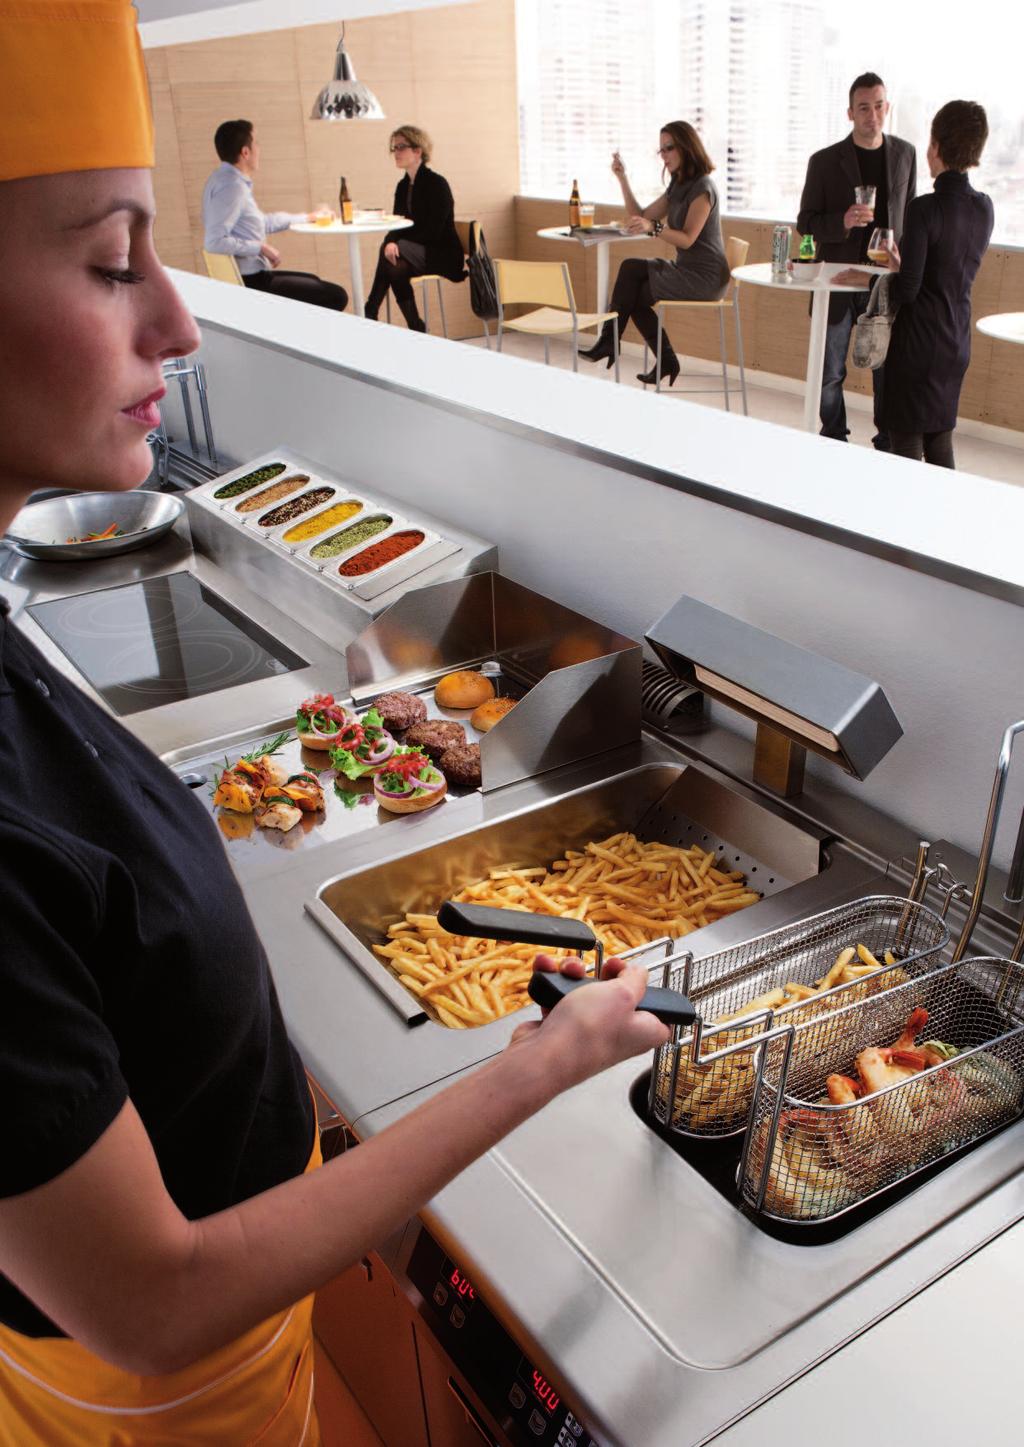 Serveries Electrolux offers a wide range of servery options to provide you with a flexible and modern